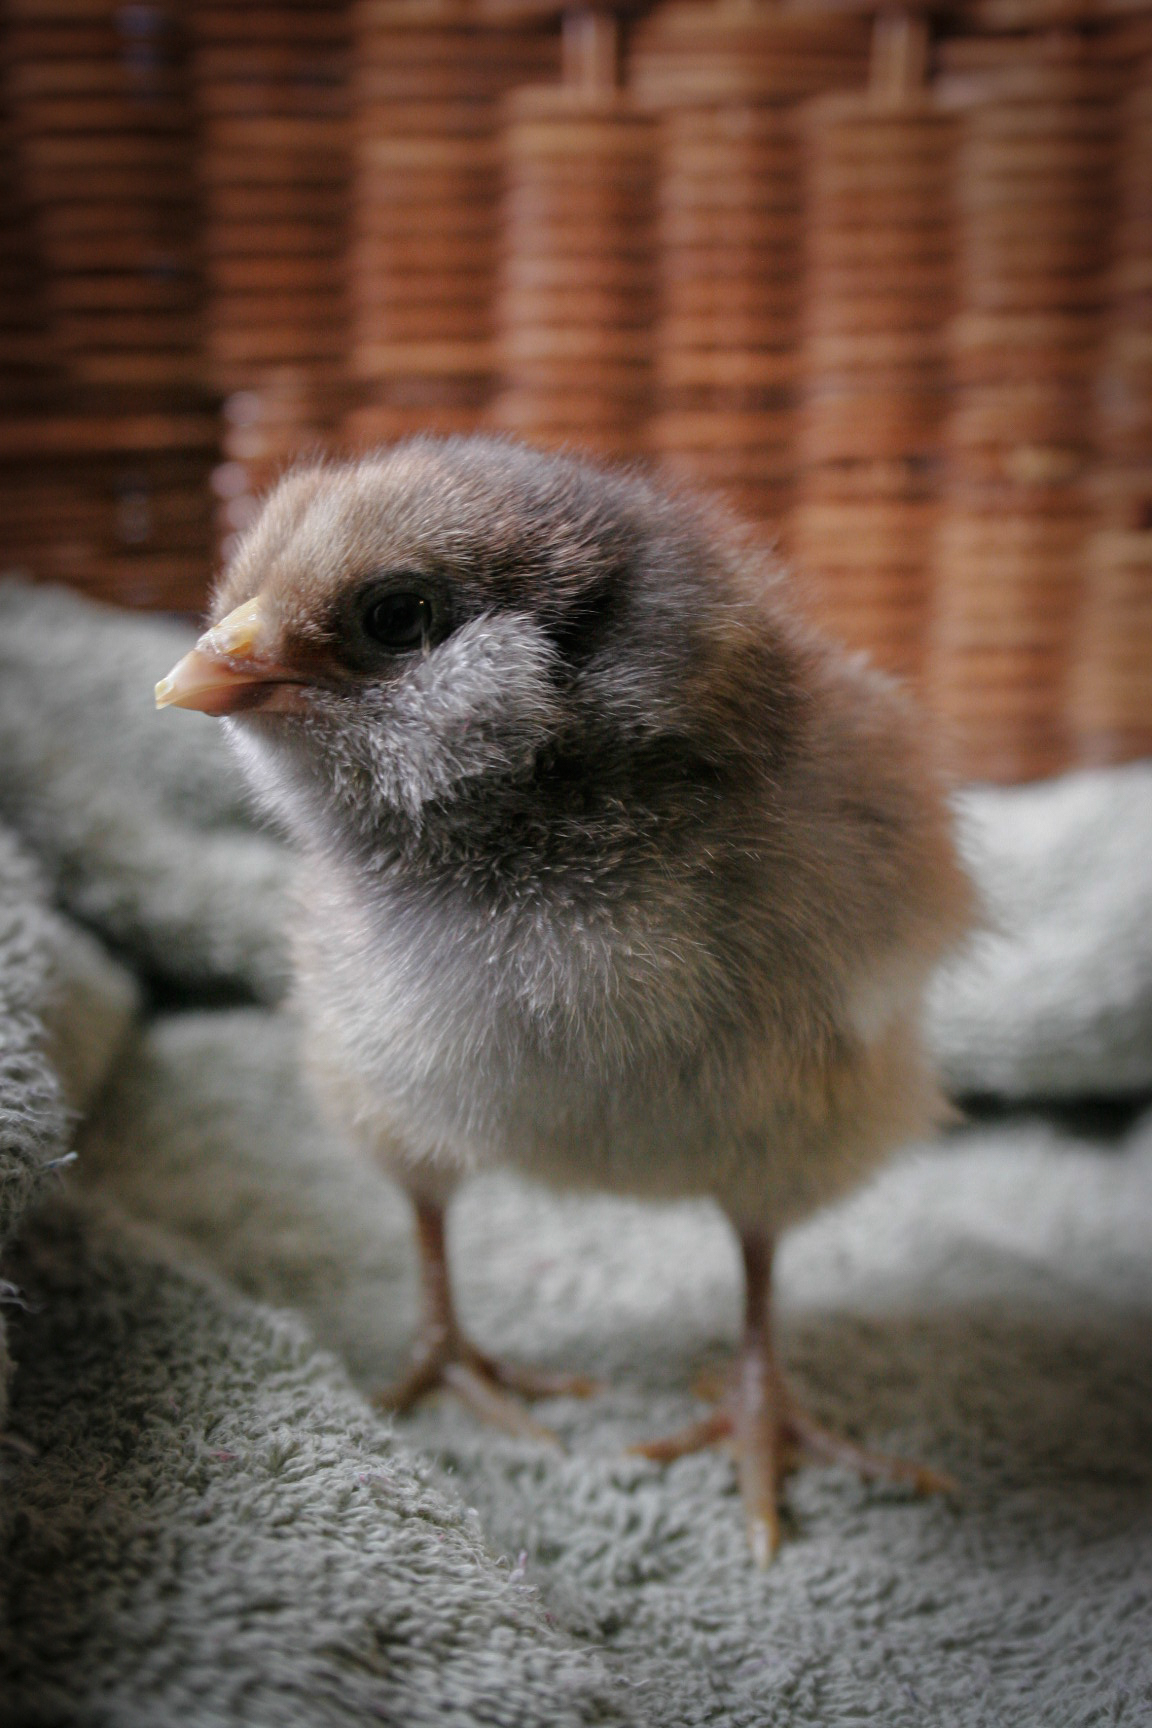 Our darkest chick, Octavia. Such a sweet little girl. She runs around the most and loves sitting on the little log I put in there. (5 days old.)